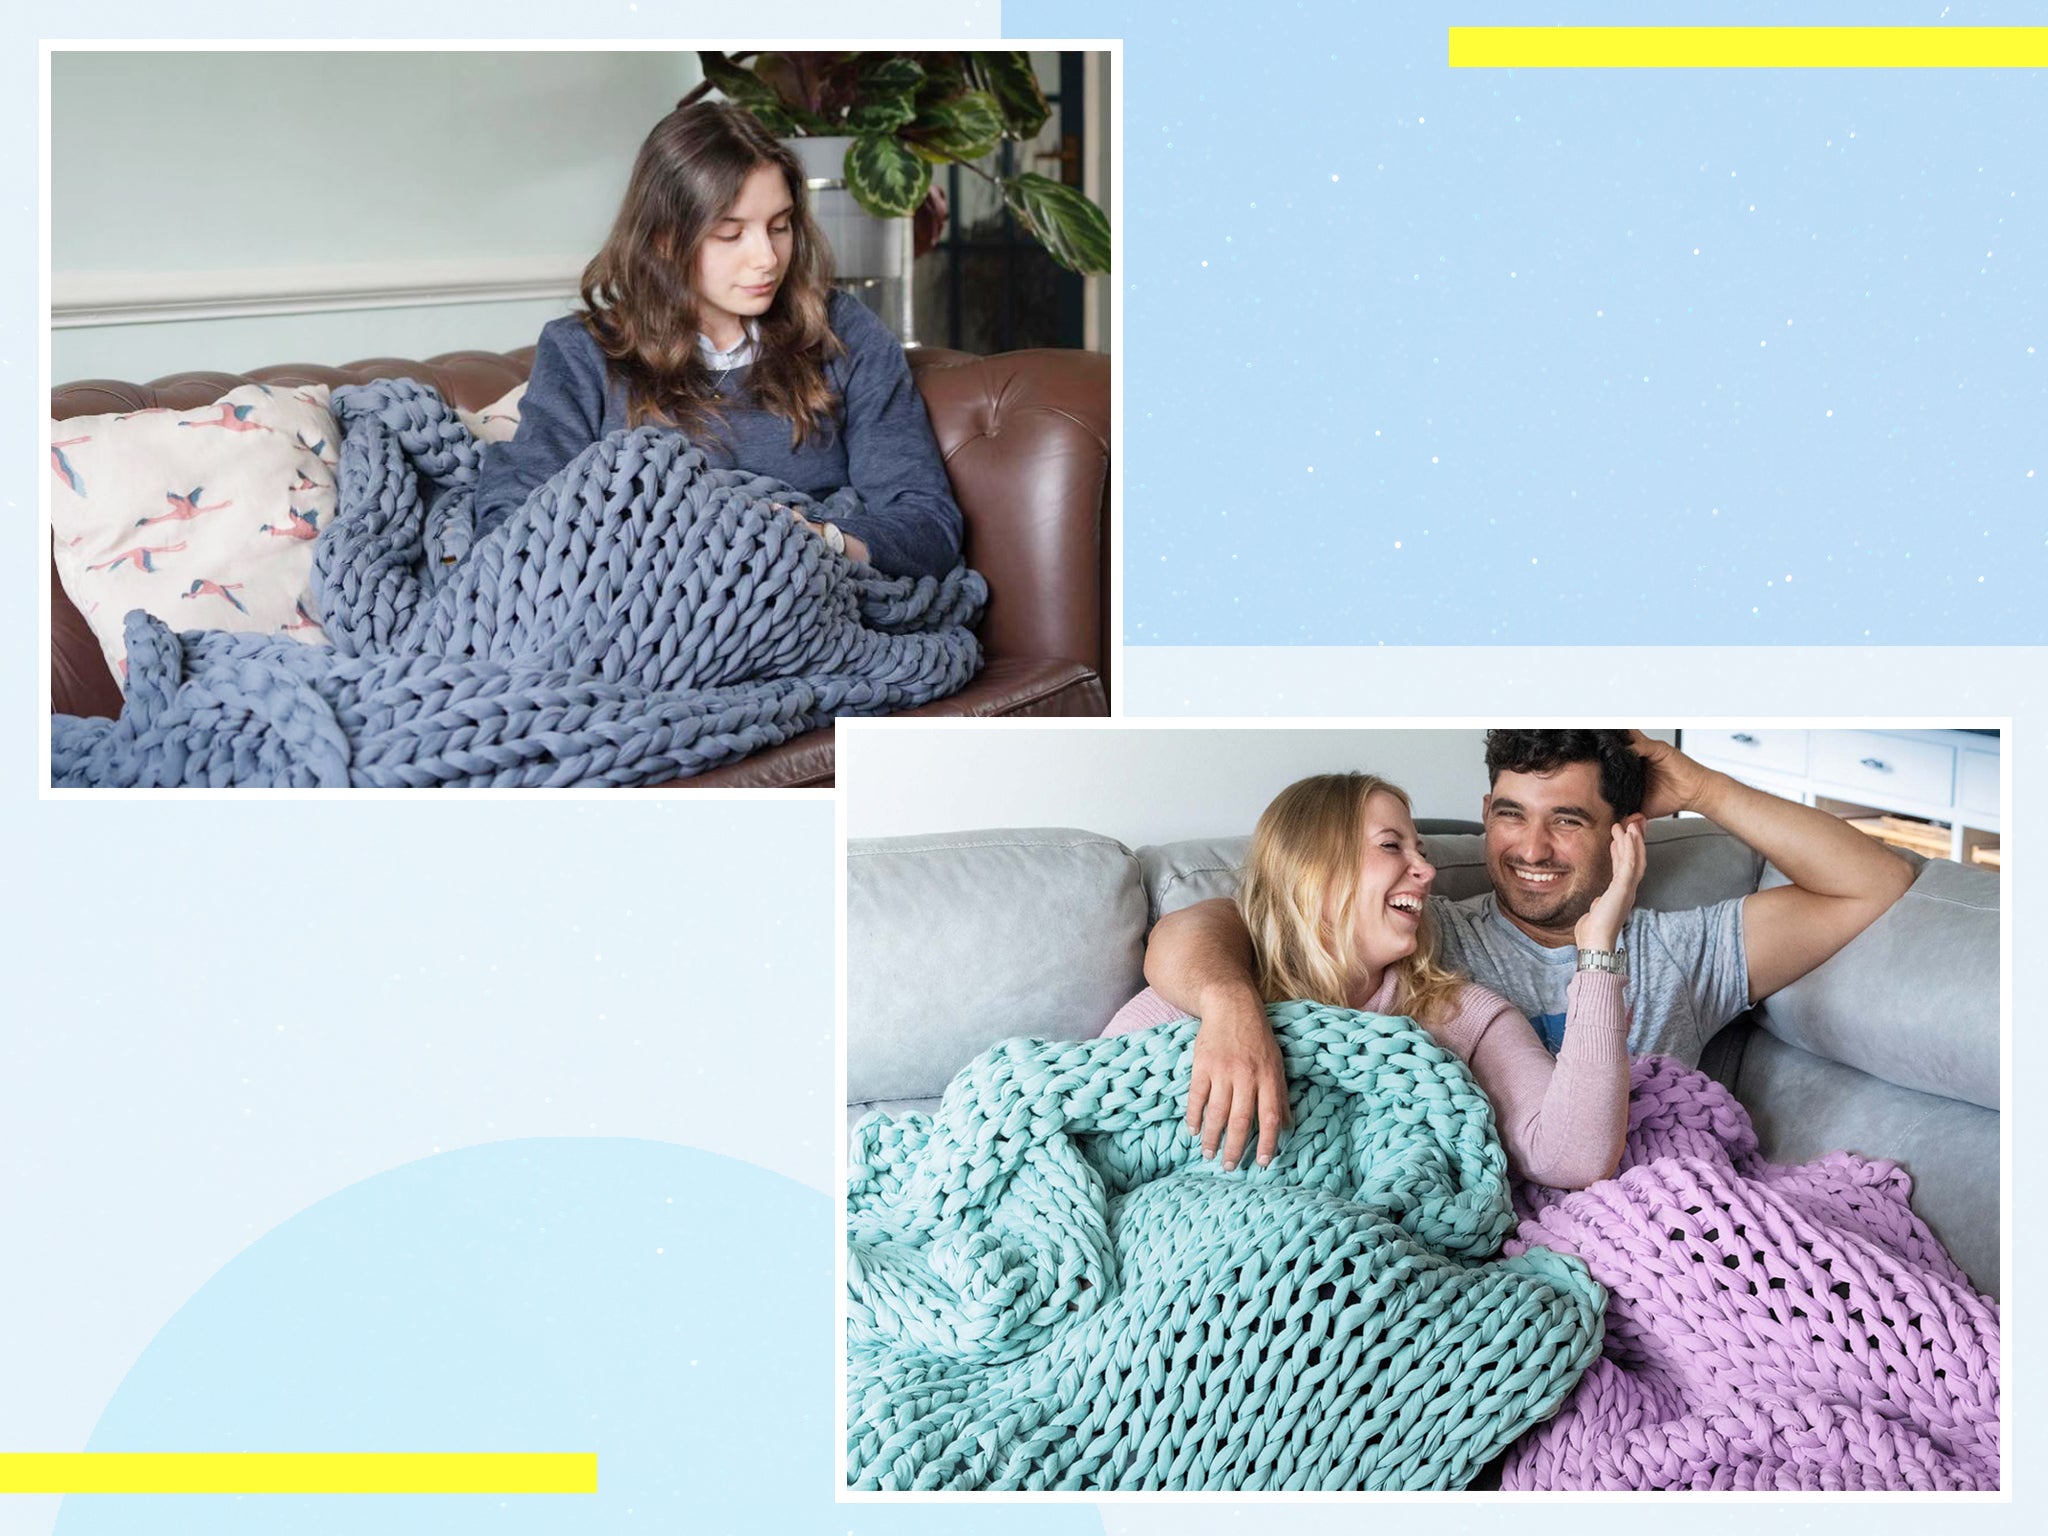 Make sure you choose a blanket that’s closest to 10 per cent of your body weight